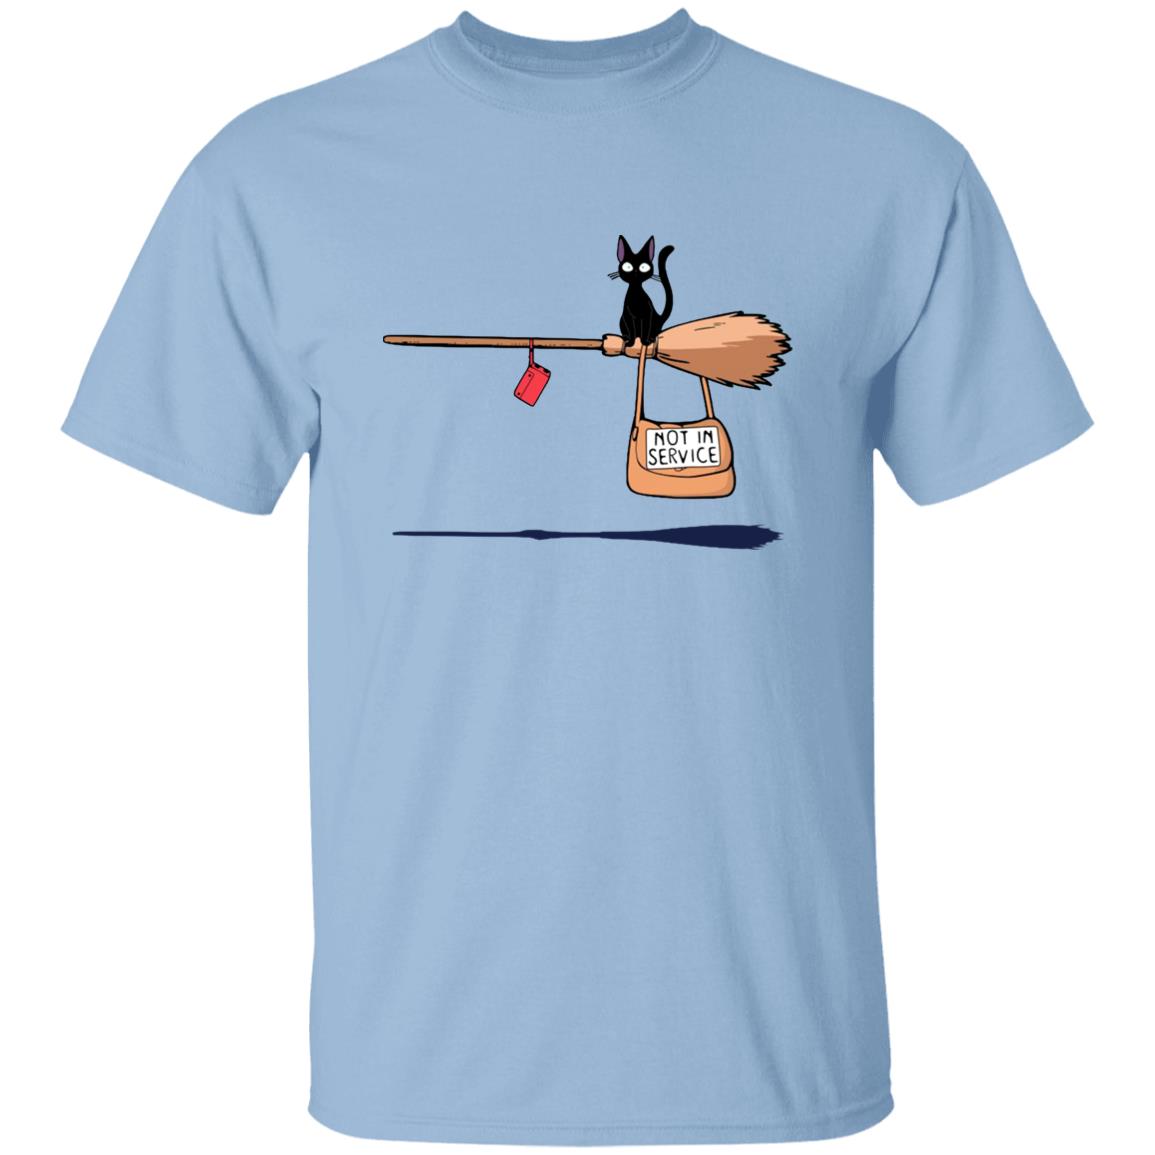 Kiki’s Delivery Service – Not in Service T Shirt Ghibli Store ghibli.store